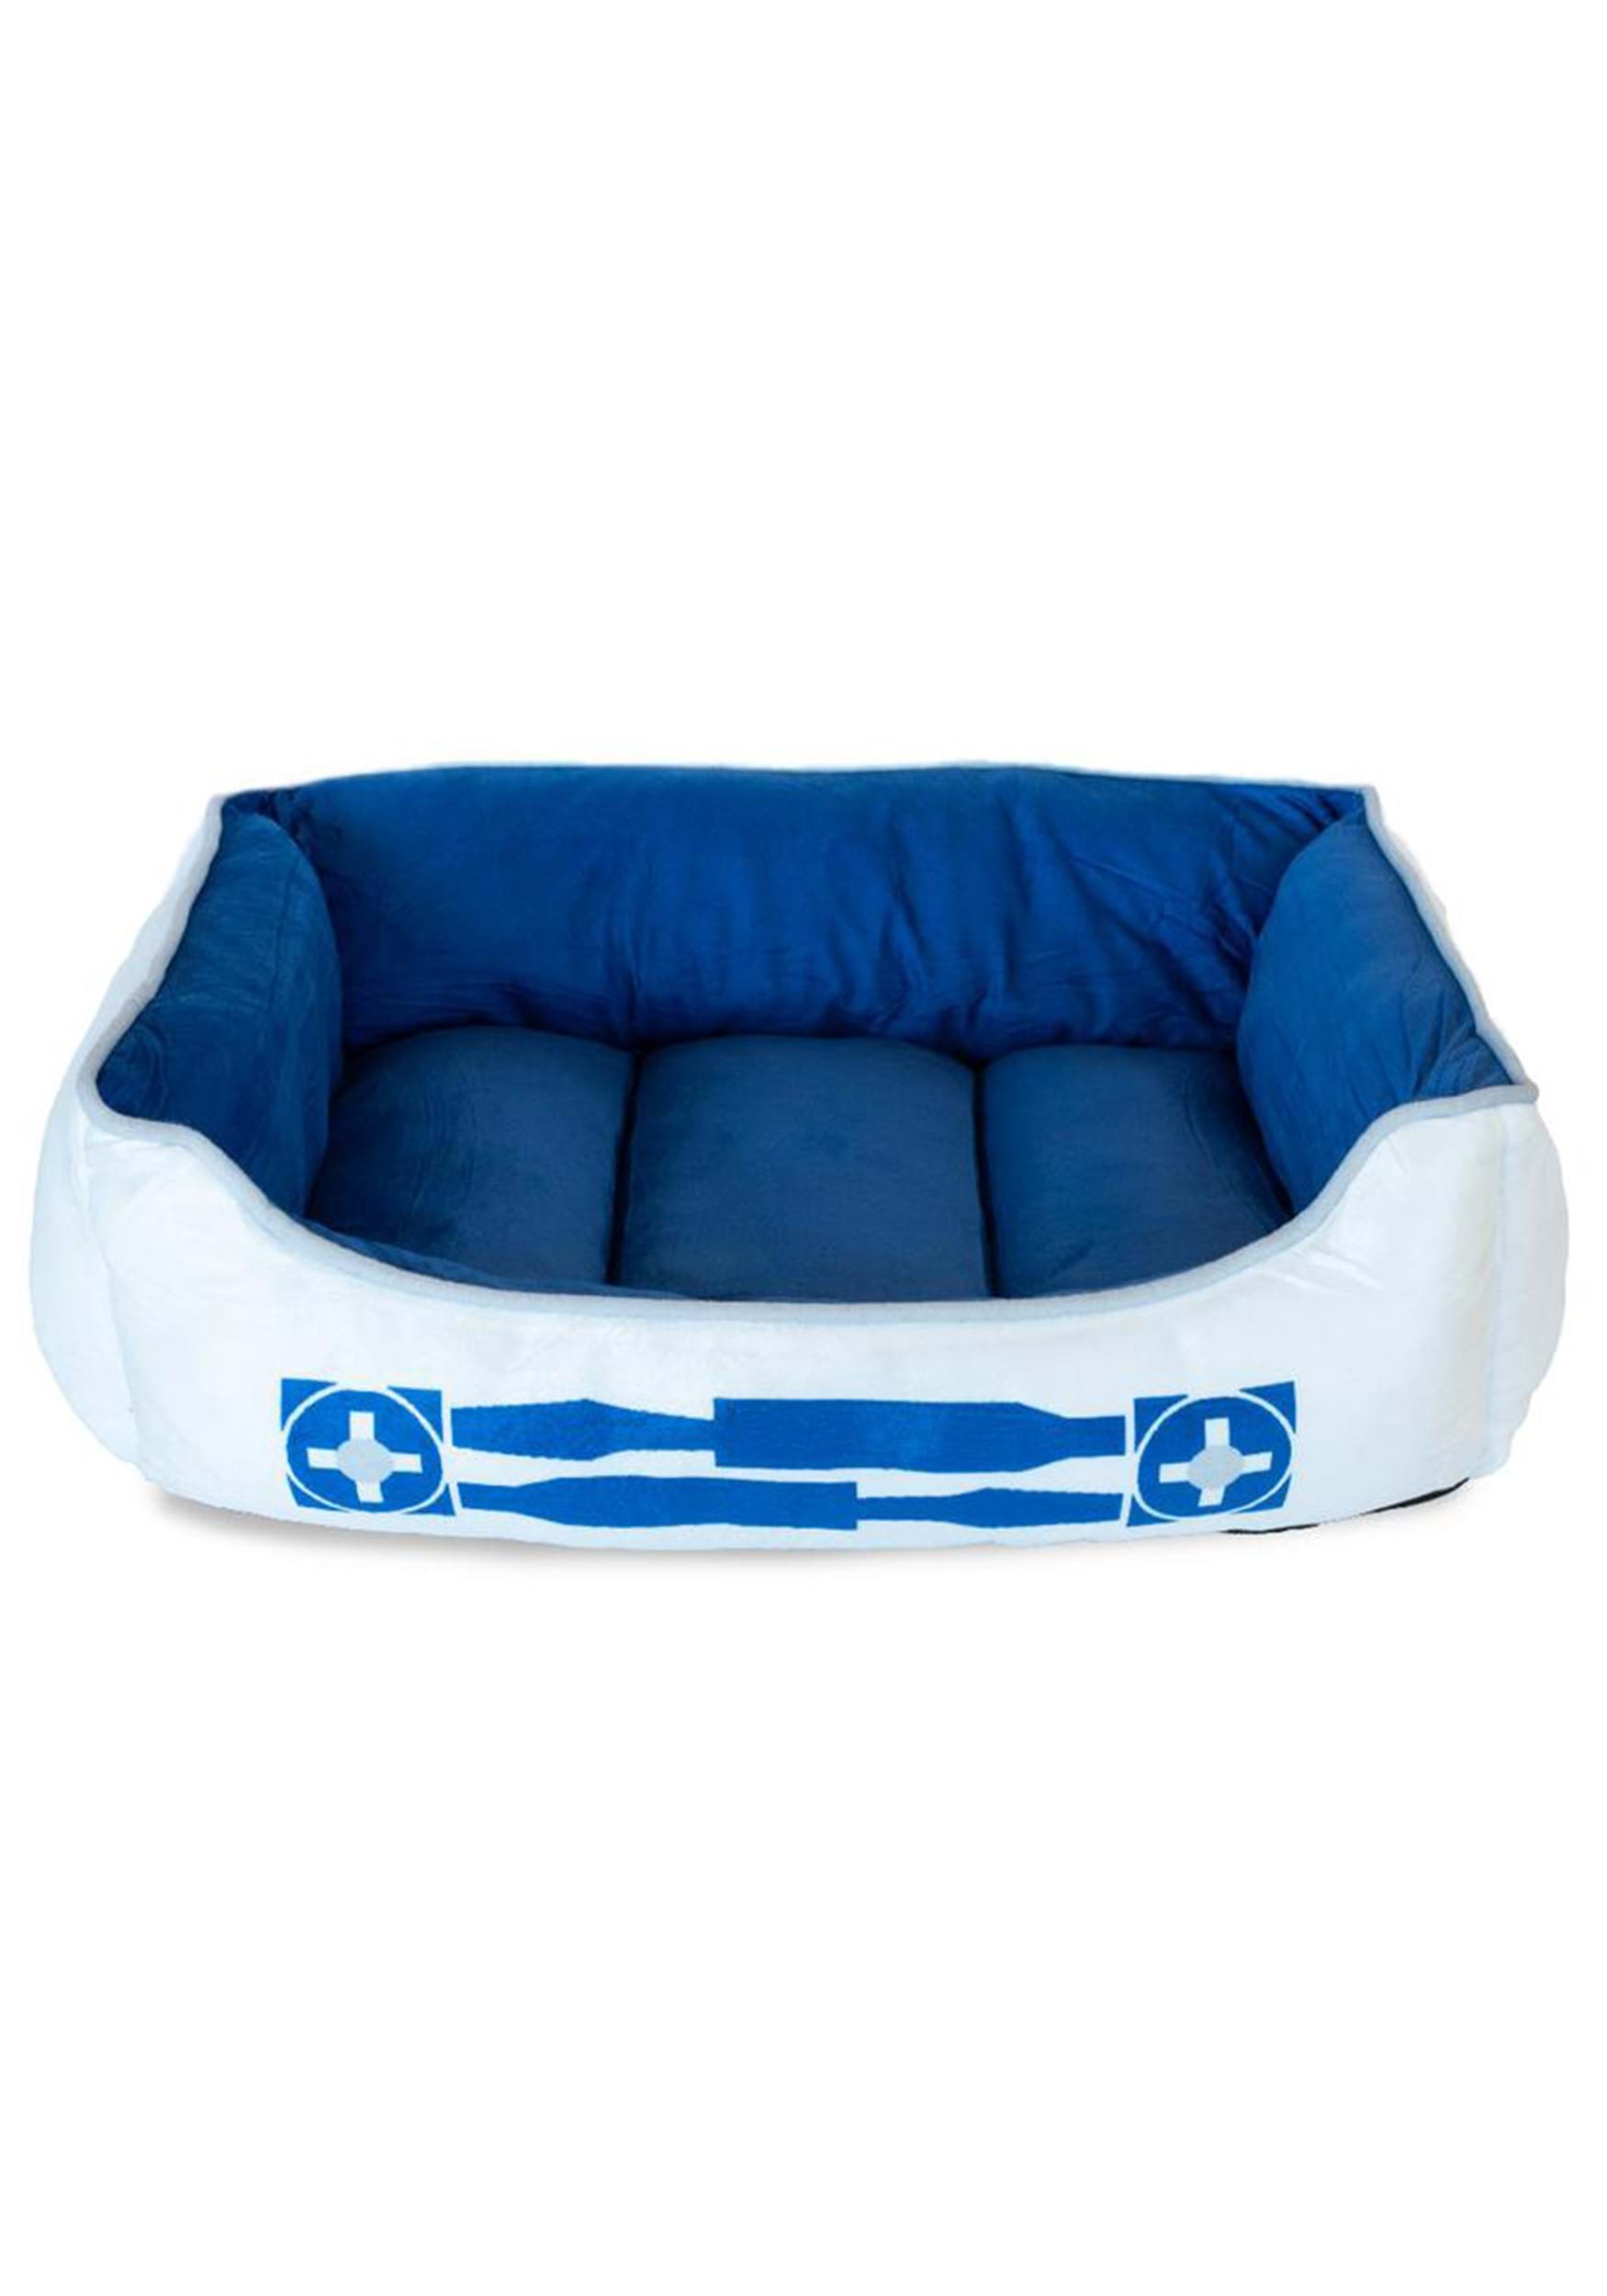 Blue and White Star Wars R2-D2 Dog Bed